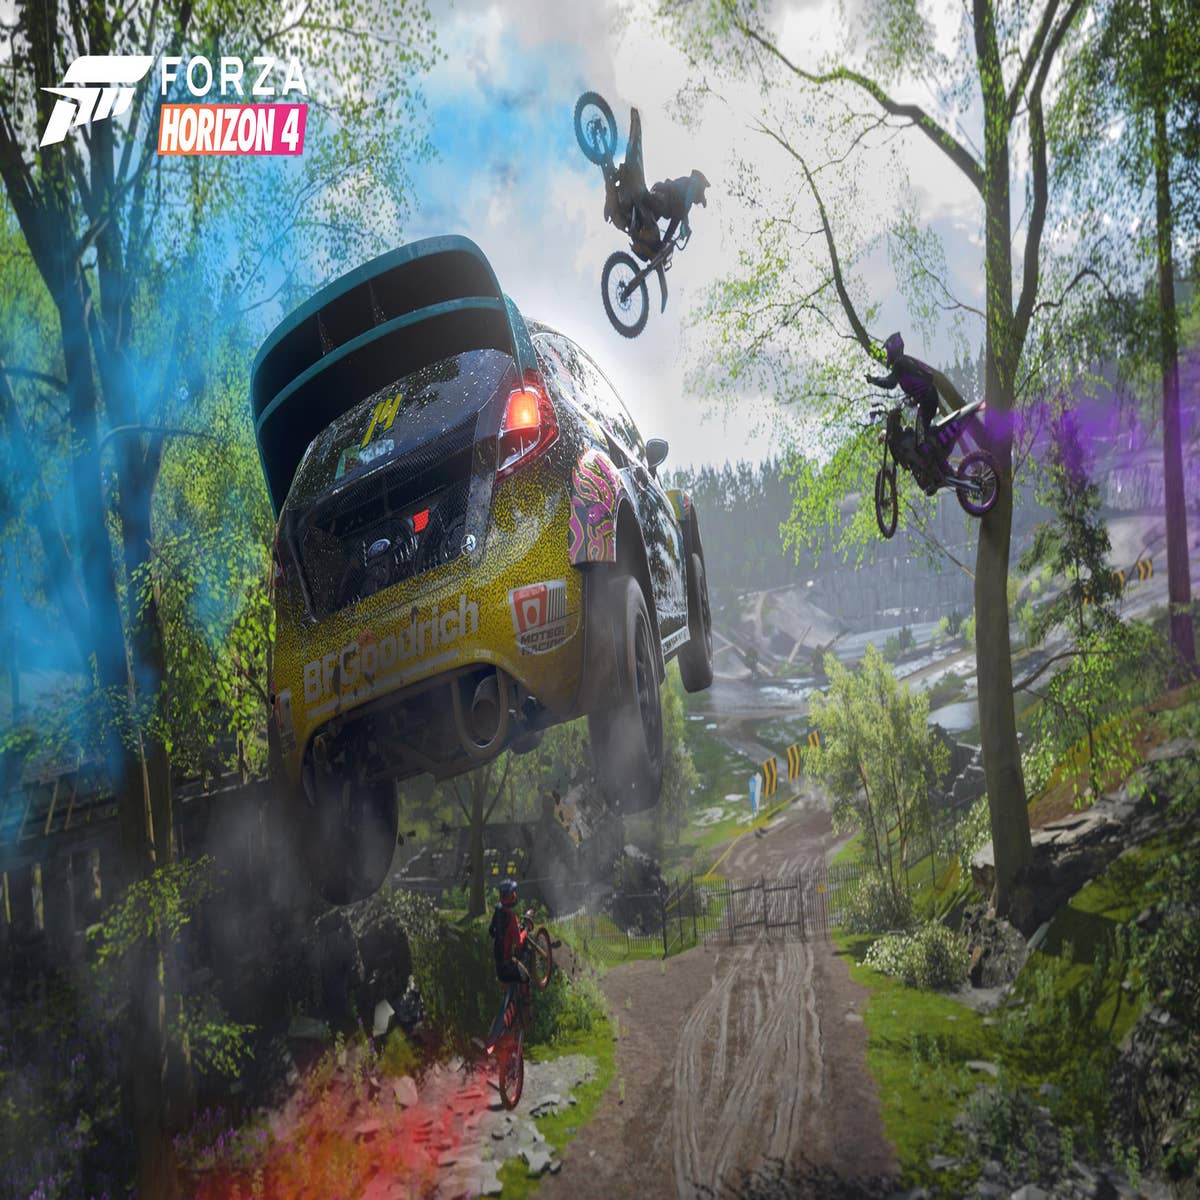 Forza Horizon 6  What We Want To See In The Game! 